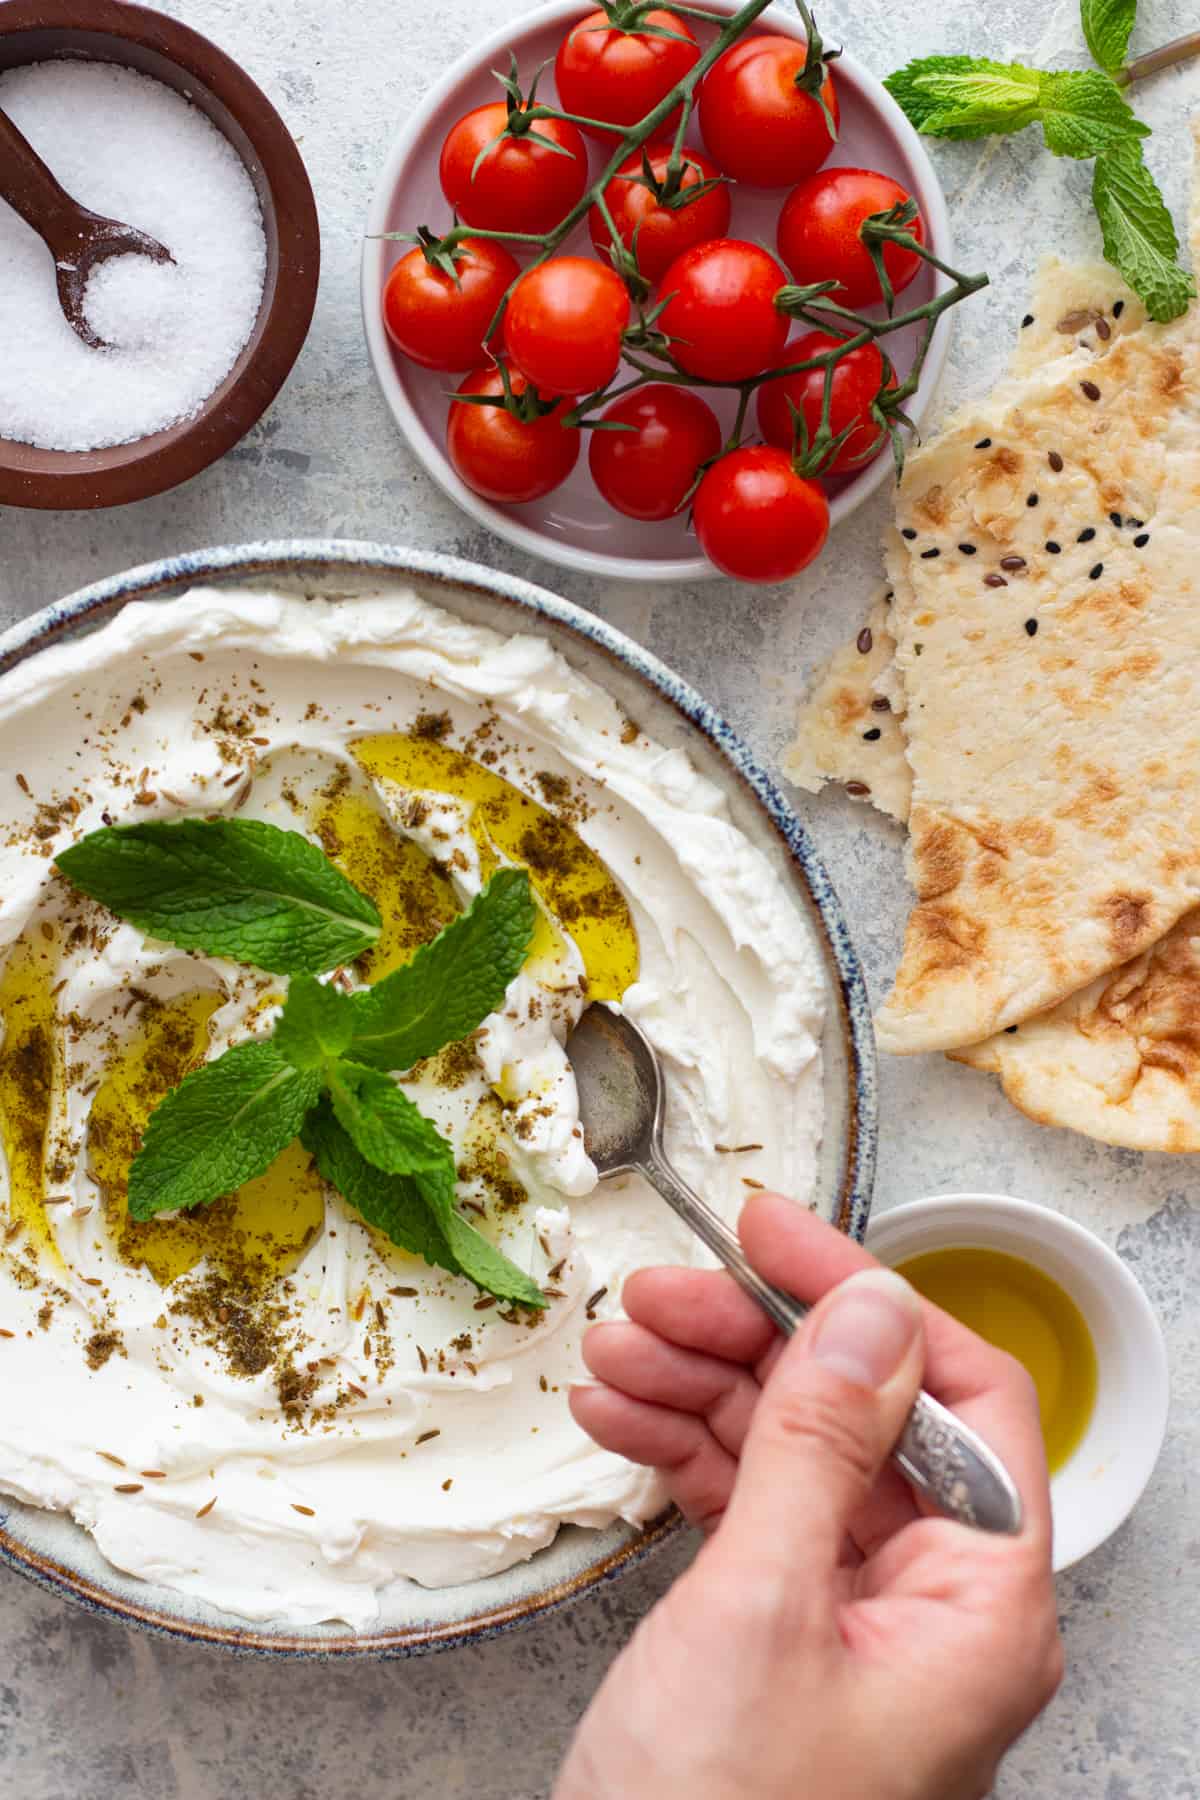 Labneh is a rich and creamy yogurt cheese from the Middle East. This easy recipe results in a tangy spread that you can top with extra virgin olive oil and serve with warm pita. 